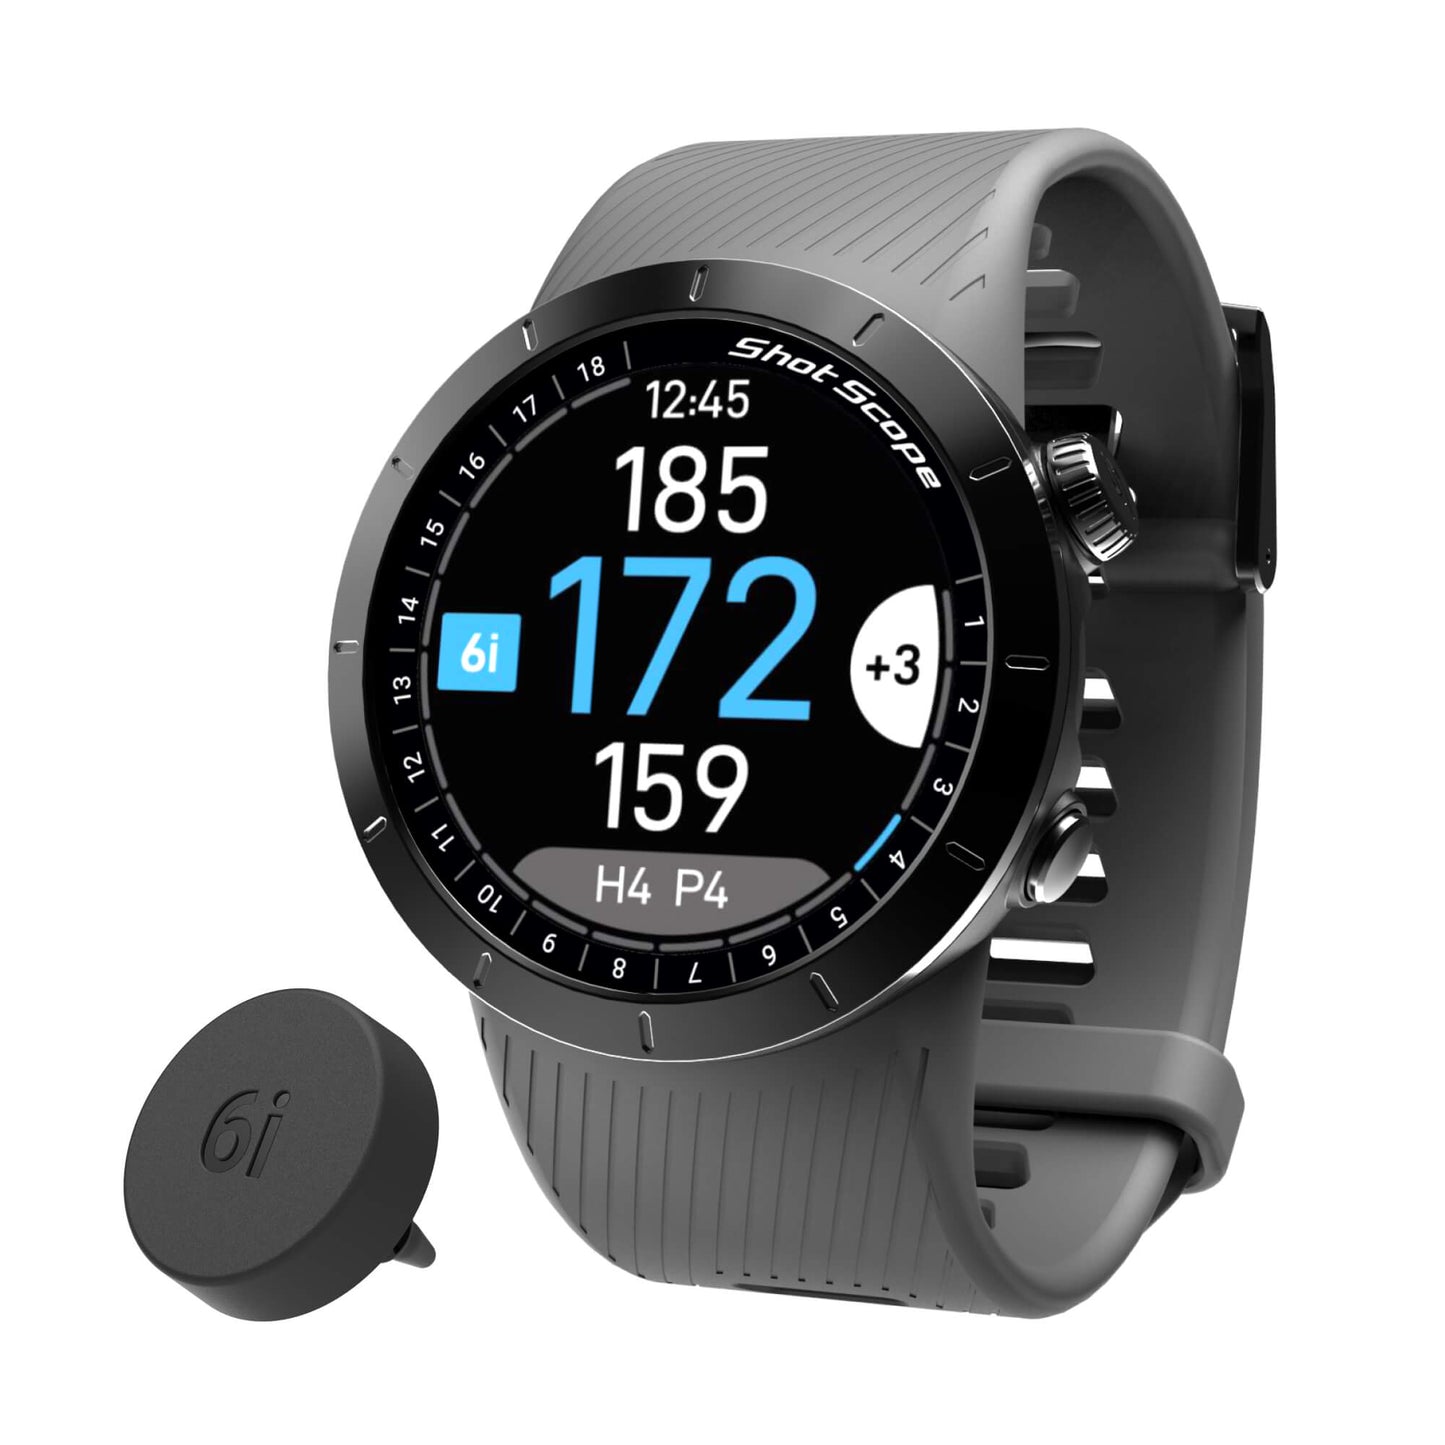 Shotscope X5 Premium Golf GPS Watch with Automatic Performance Tracking Grey  